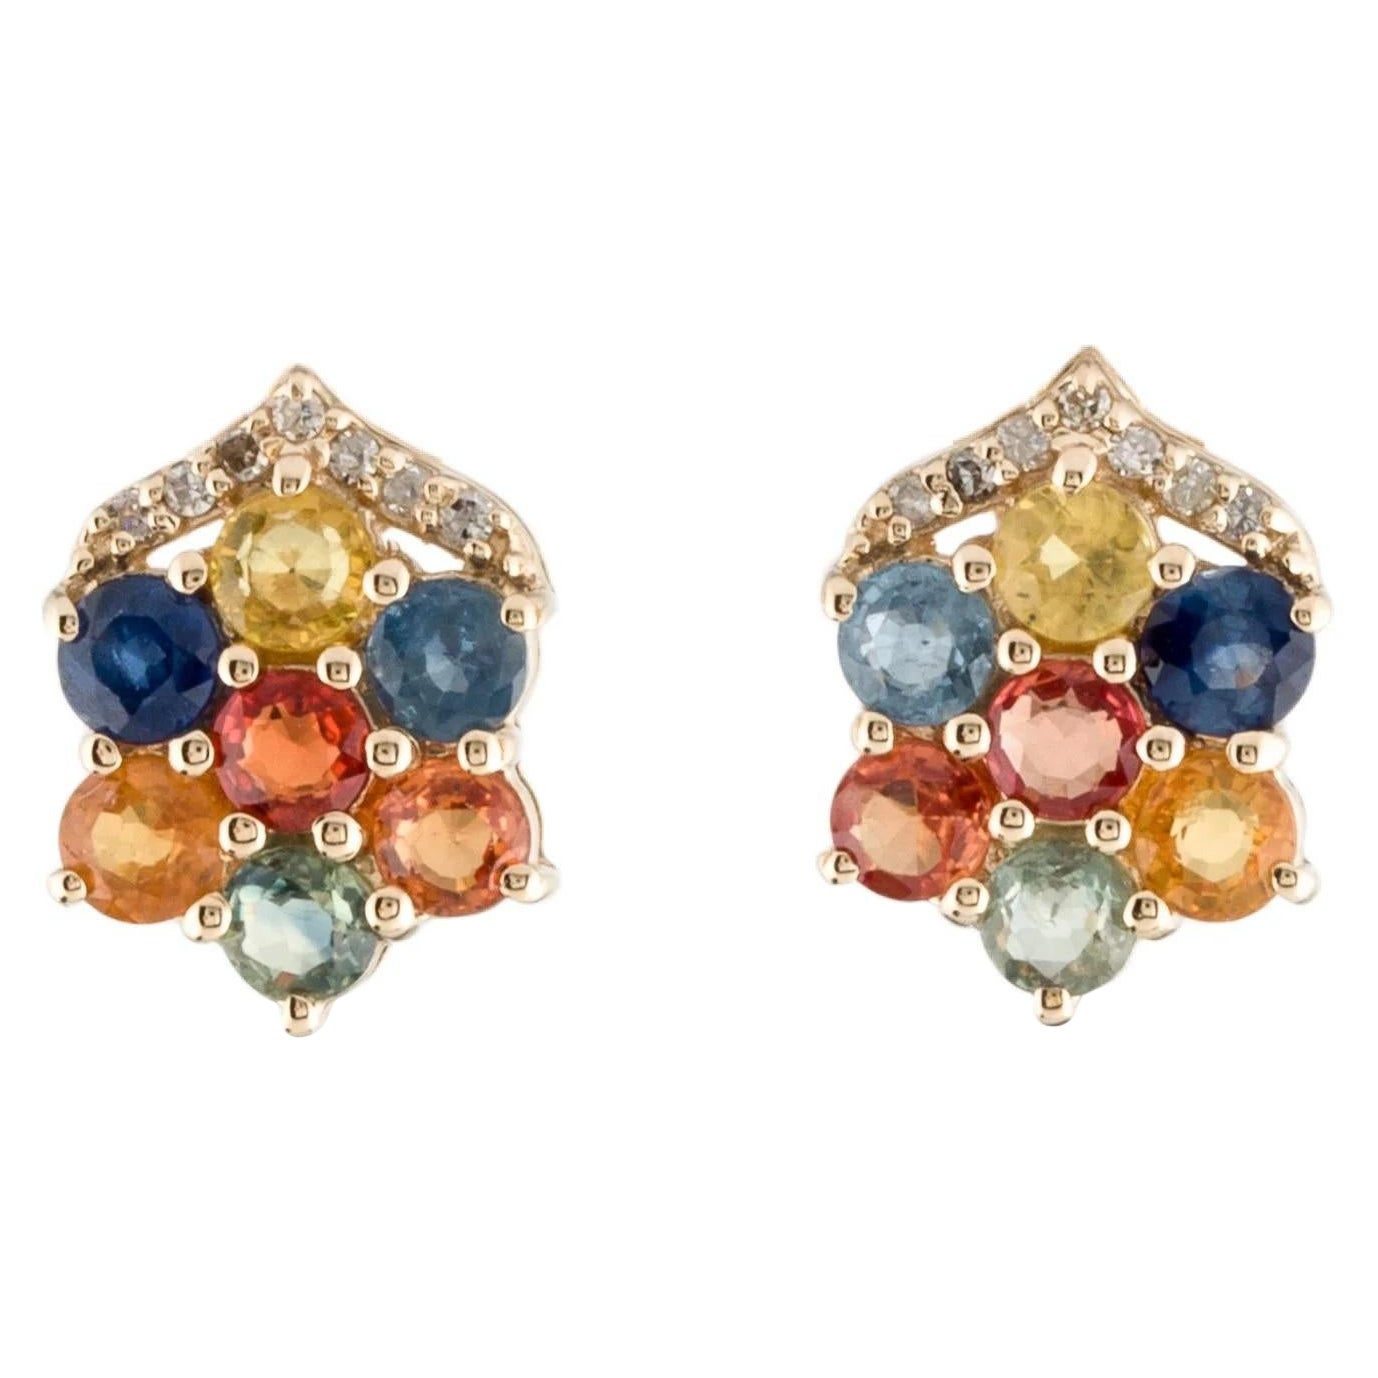 Dazzling 14K Yellow Gold Earrings with Multi-Colored Sapphire and Diamonds